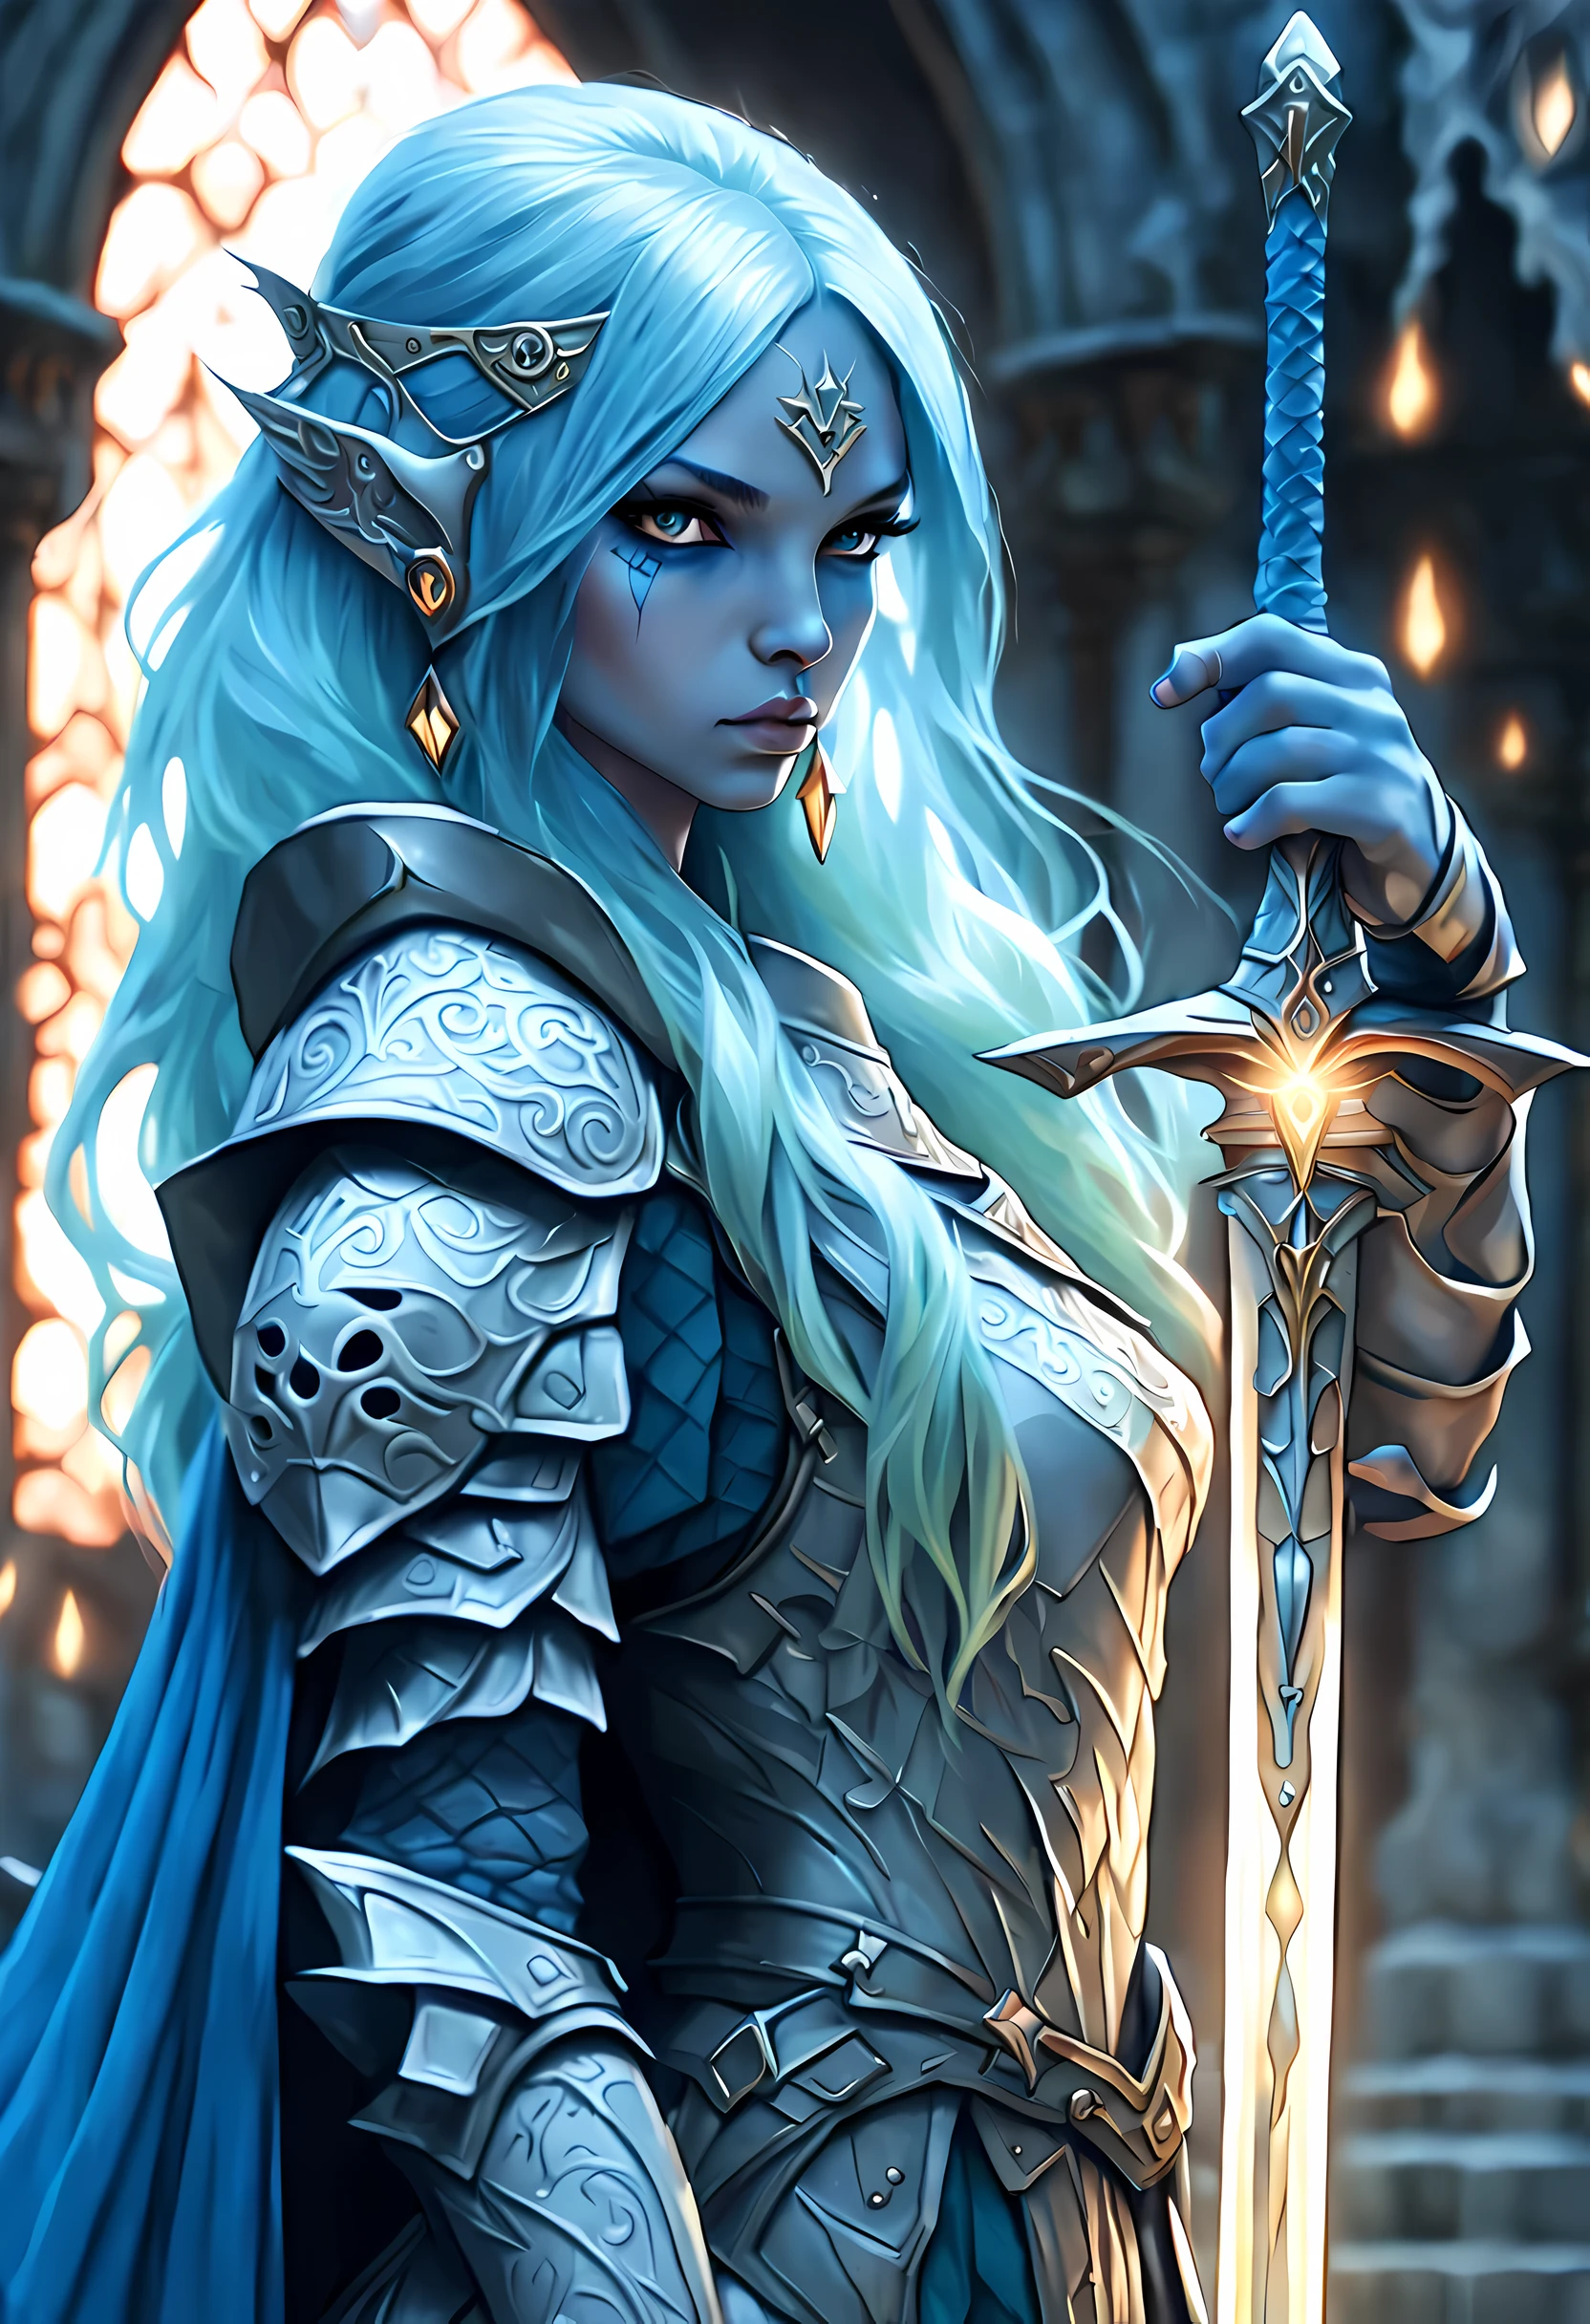 fAntAsy Art, dnd Art, RPG Art, portrAit, (mAsterpiece: 1.4) A (portrAit: 1.3) intense detAils, highly detAiled, photoreAlistic, best quAlity, highres, portrAit A femAle (fAntAsy Art, MAsterpiece, best quAlity: 1.3) ((Blau skin: 1.5)), intense detAils fAciAl detAils, exquisite beAuty, (fAntAsy Art, MAsterpiece, best quAlity) Kleriker, (Blau: 1.3) skinned femAle, Weiß hAir, long hAir, (hAir hides eArs: 1.5), (Grün: 1.3) Auge, fAntAsy Art, MAsterpiece, best quAlity) Armed A fiery sword red fire, weAring heAvy (Weiß: 1.3) hAlf plAte mAil Armor, weAring high heeled lAced boots, weAring An(orAnge :1.3) cloAk, weAring glowing holy symbol GlowingRunes_Gelb, within fAntAsy temple bAckground, Reflexionslicht, high detAils, best quAlity, 16k, [ultrA detAiled], mAsterpiece, best quAlity, (extremely detAiled), Nahaufnahme, photoreAlistic, Roh, fAntAsy Art, dnd Art, fAntAsy Art, reAlistic Art,((best quAlity)), ((mAsterpiece)), (detAiled), perfect fAce,